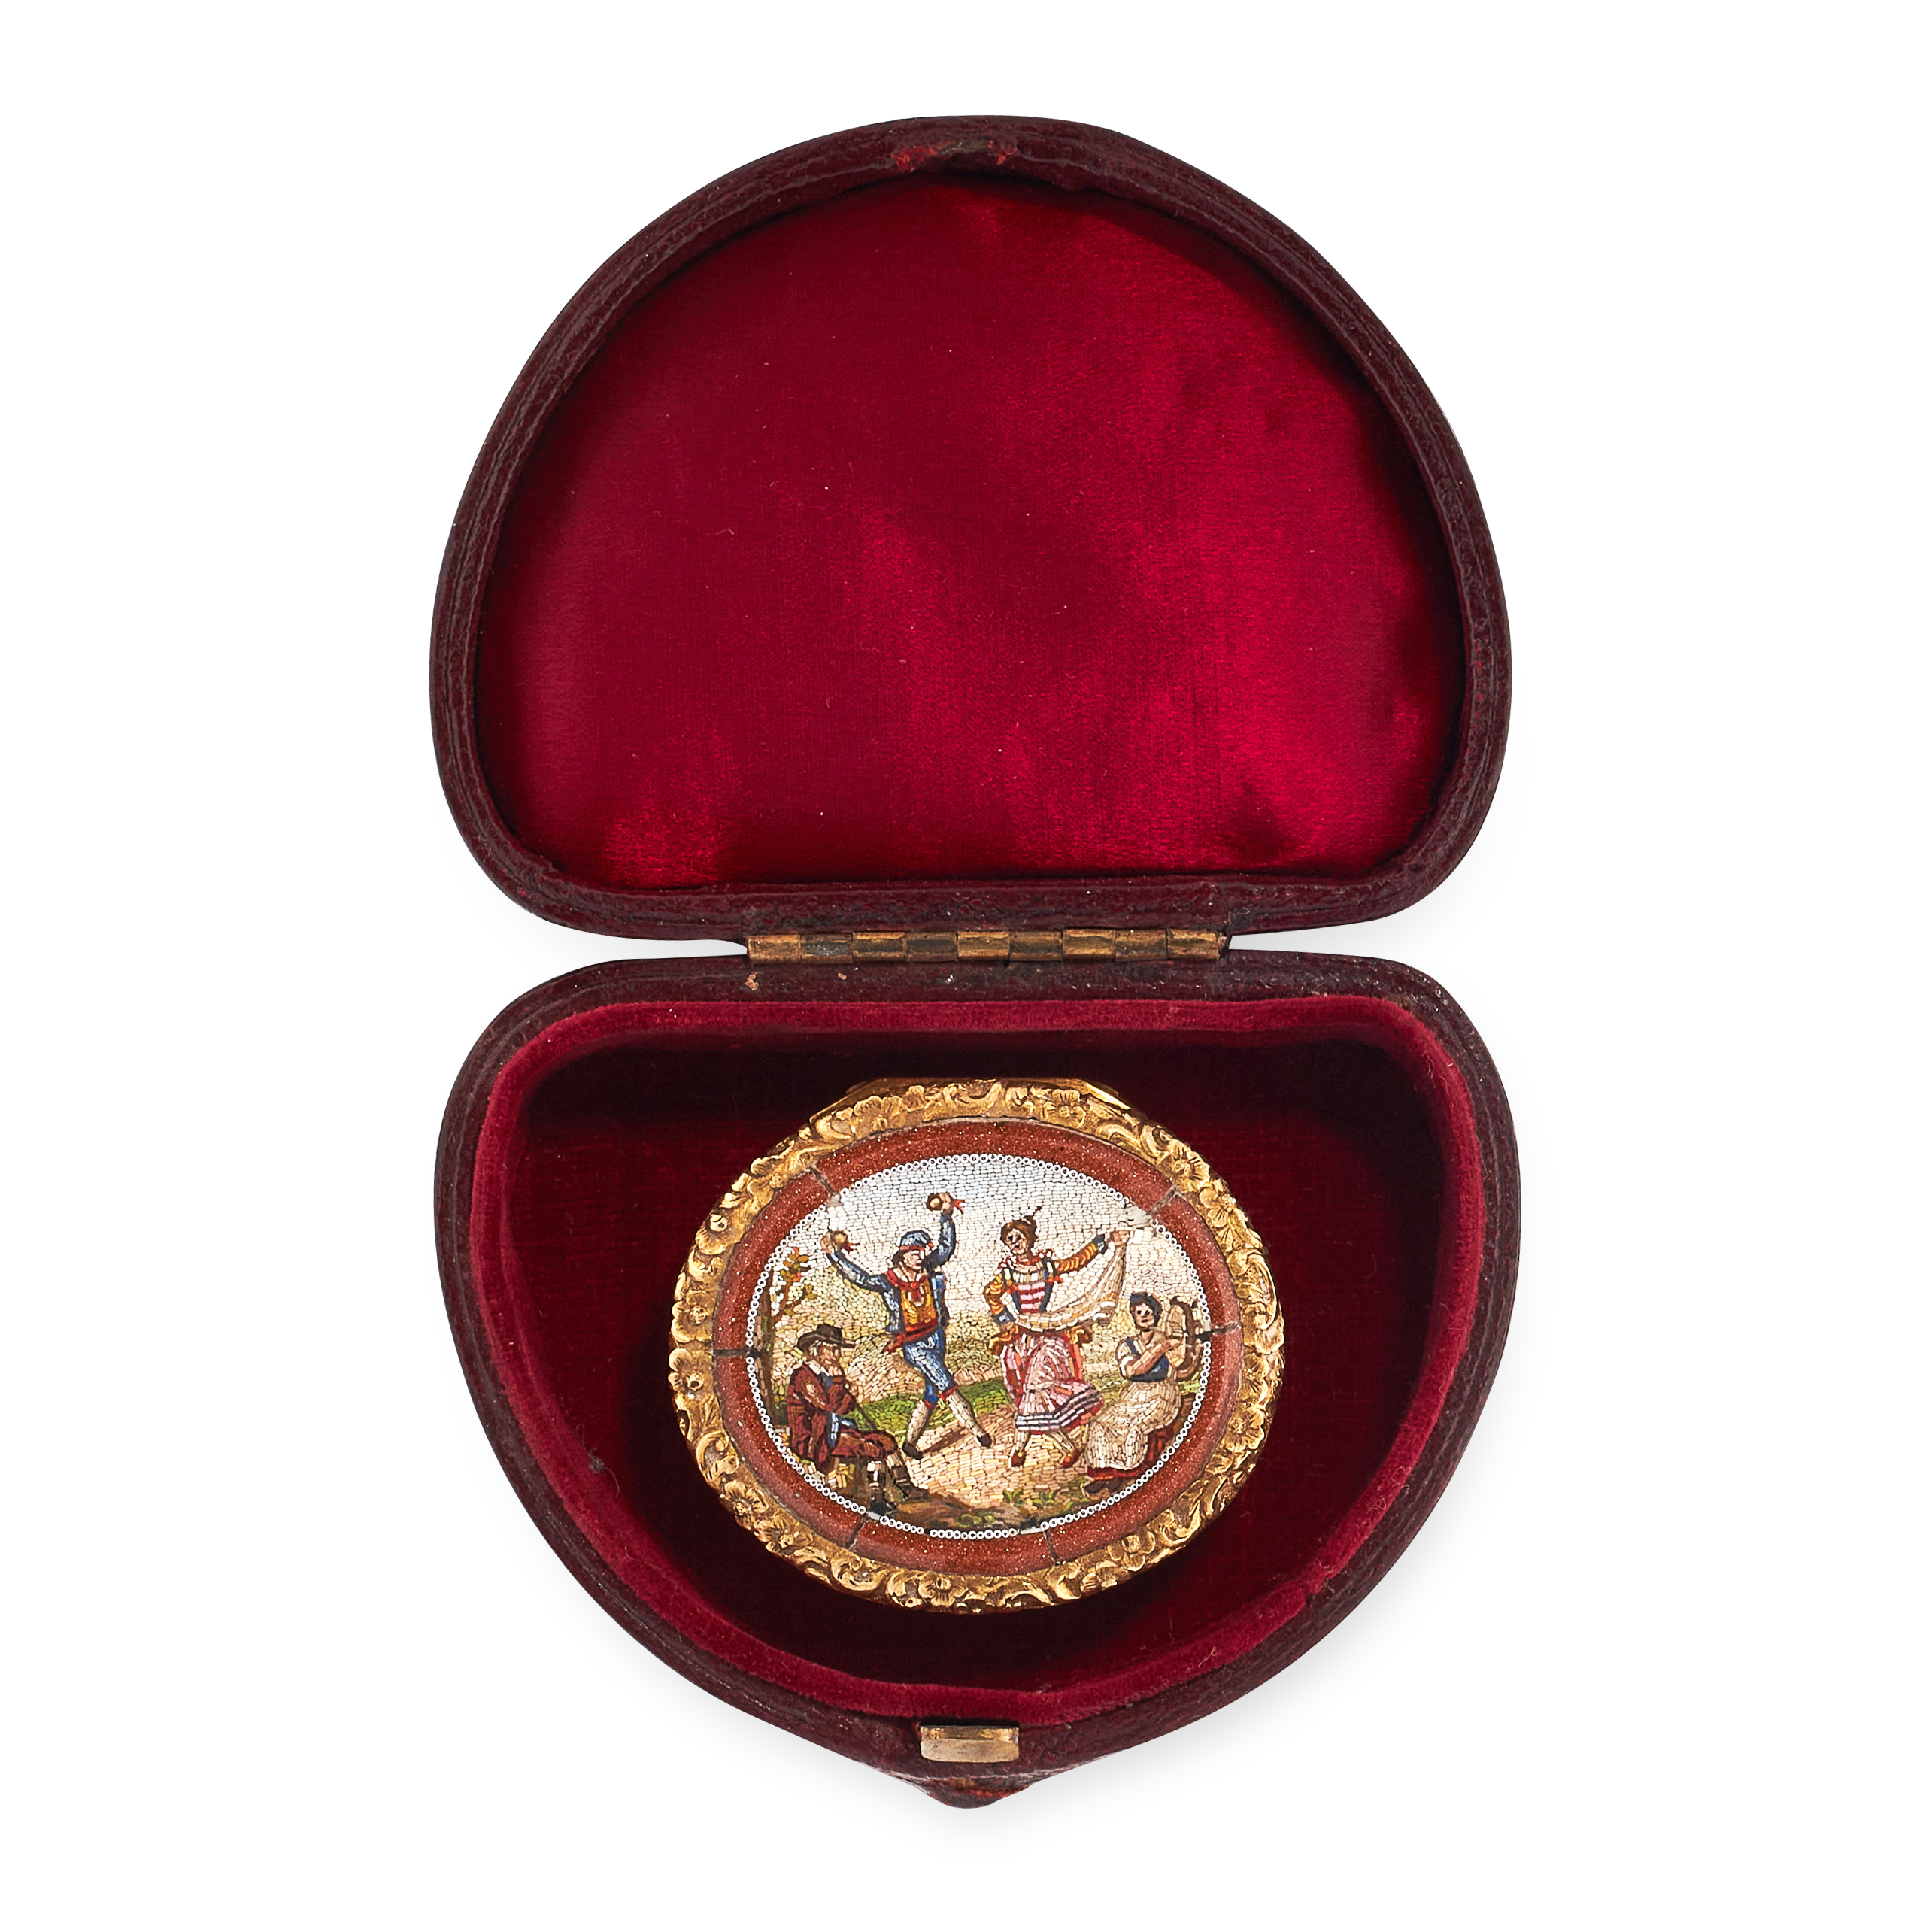 AN ANTIQUE MICROMOSAIC VINAIGRETTE BOX, 19TH CENTURY the oval body with engine turned decoration - Image 2 of 2